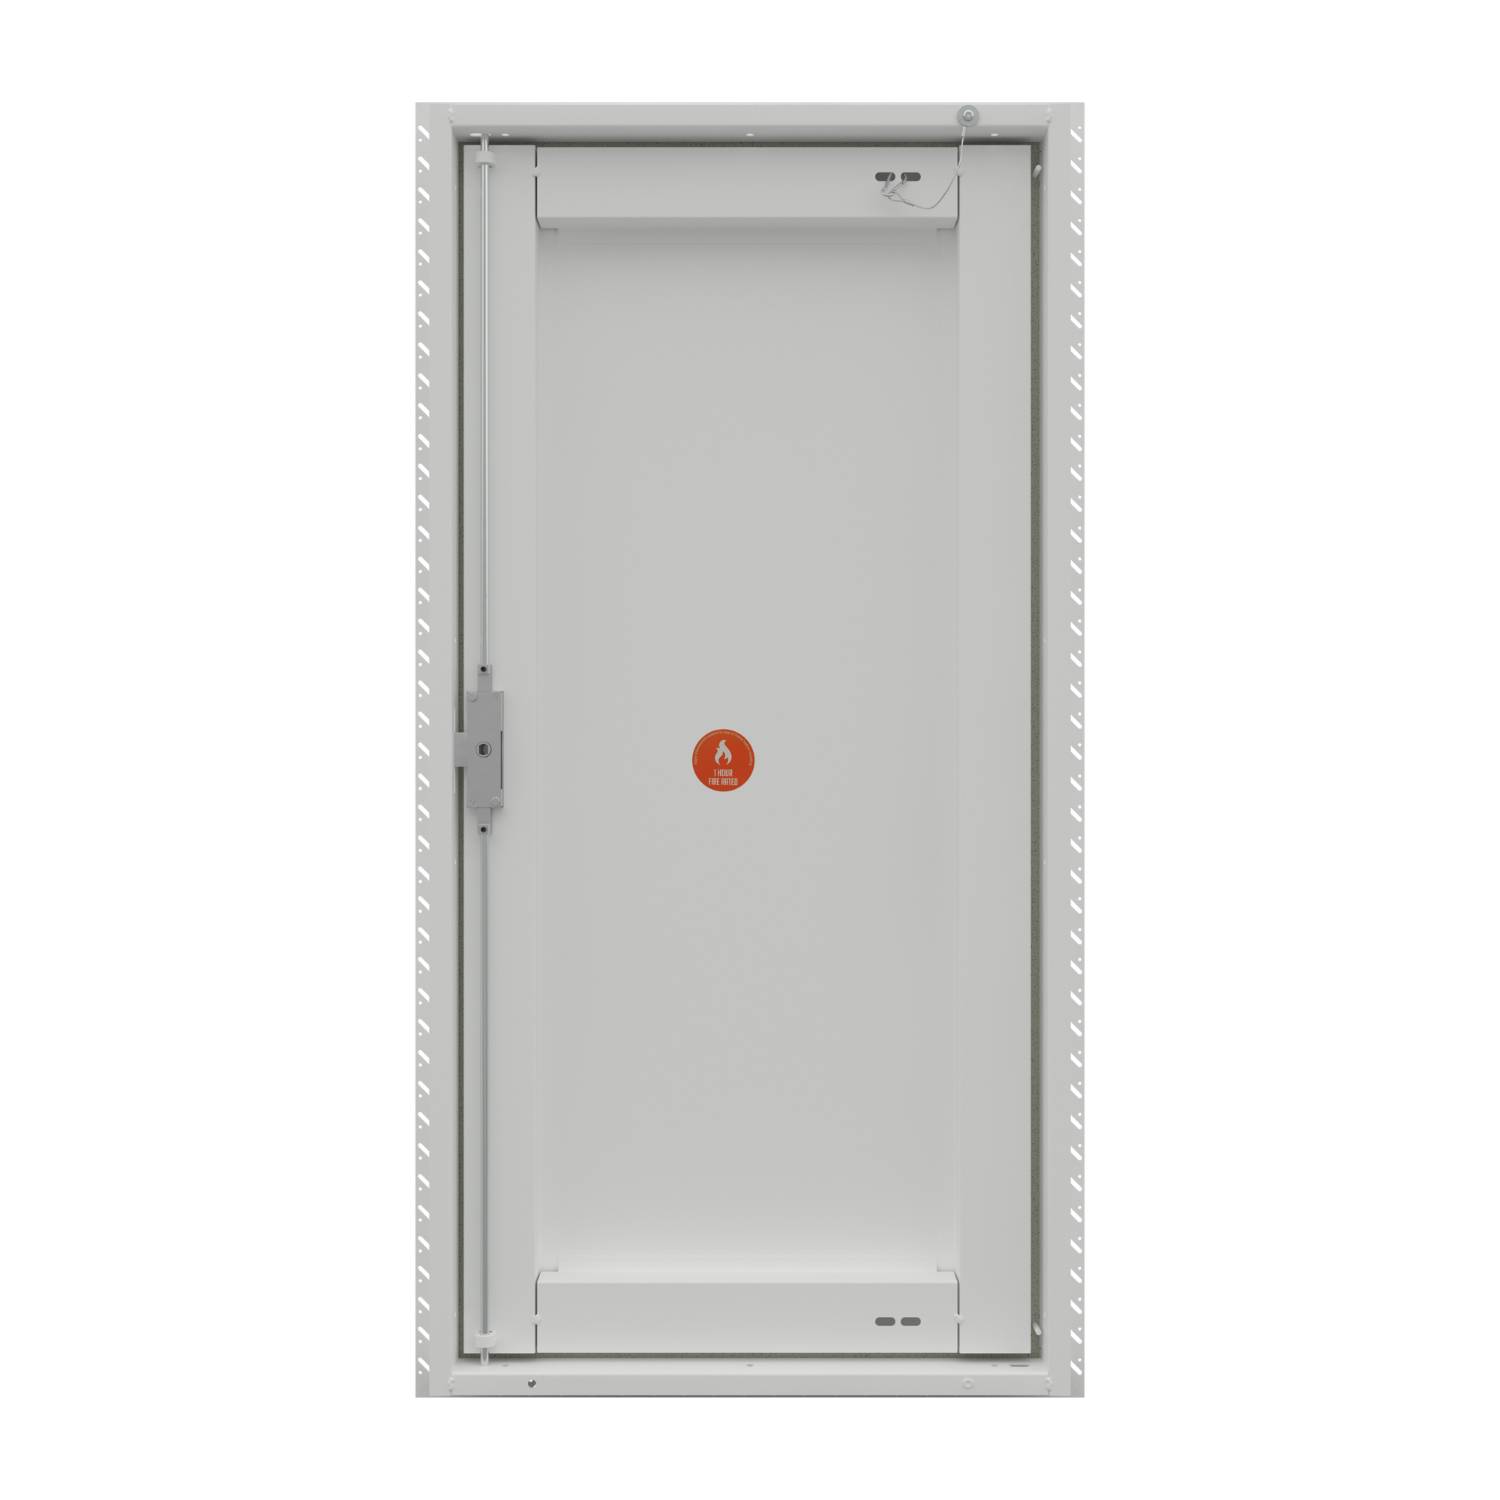 Metal Riser Door (EX51 Range) - Picture Frame - 2 Hour Fire Rated From the Face & Rear - Smoke Tested - Wall Access Panel